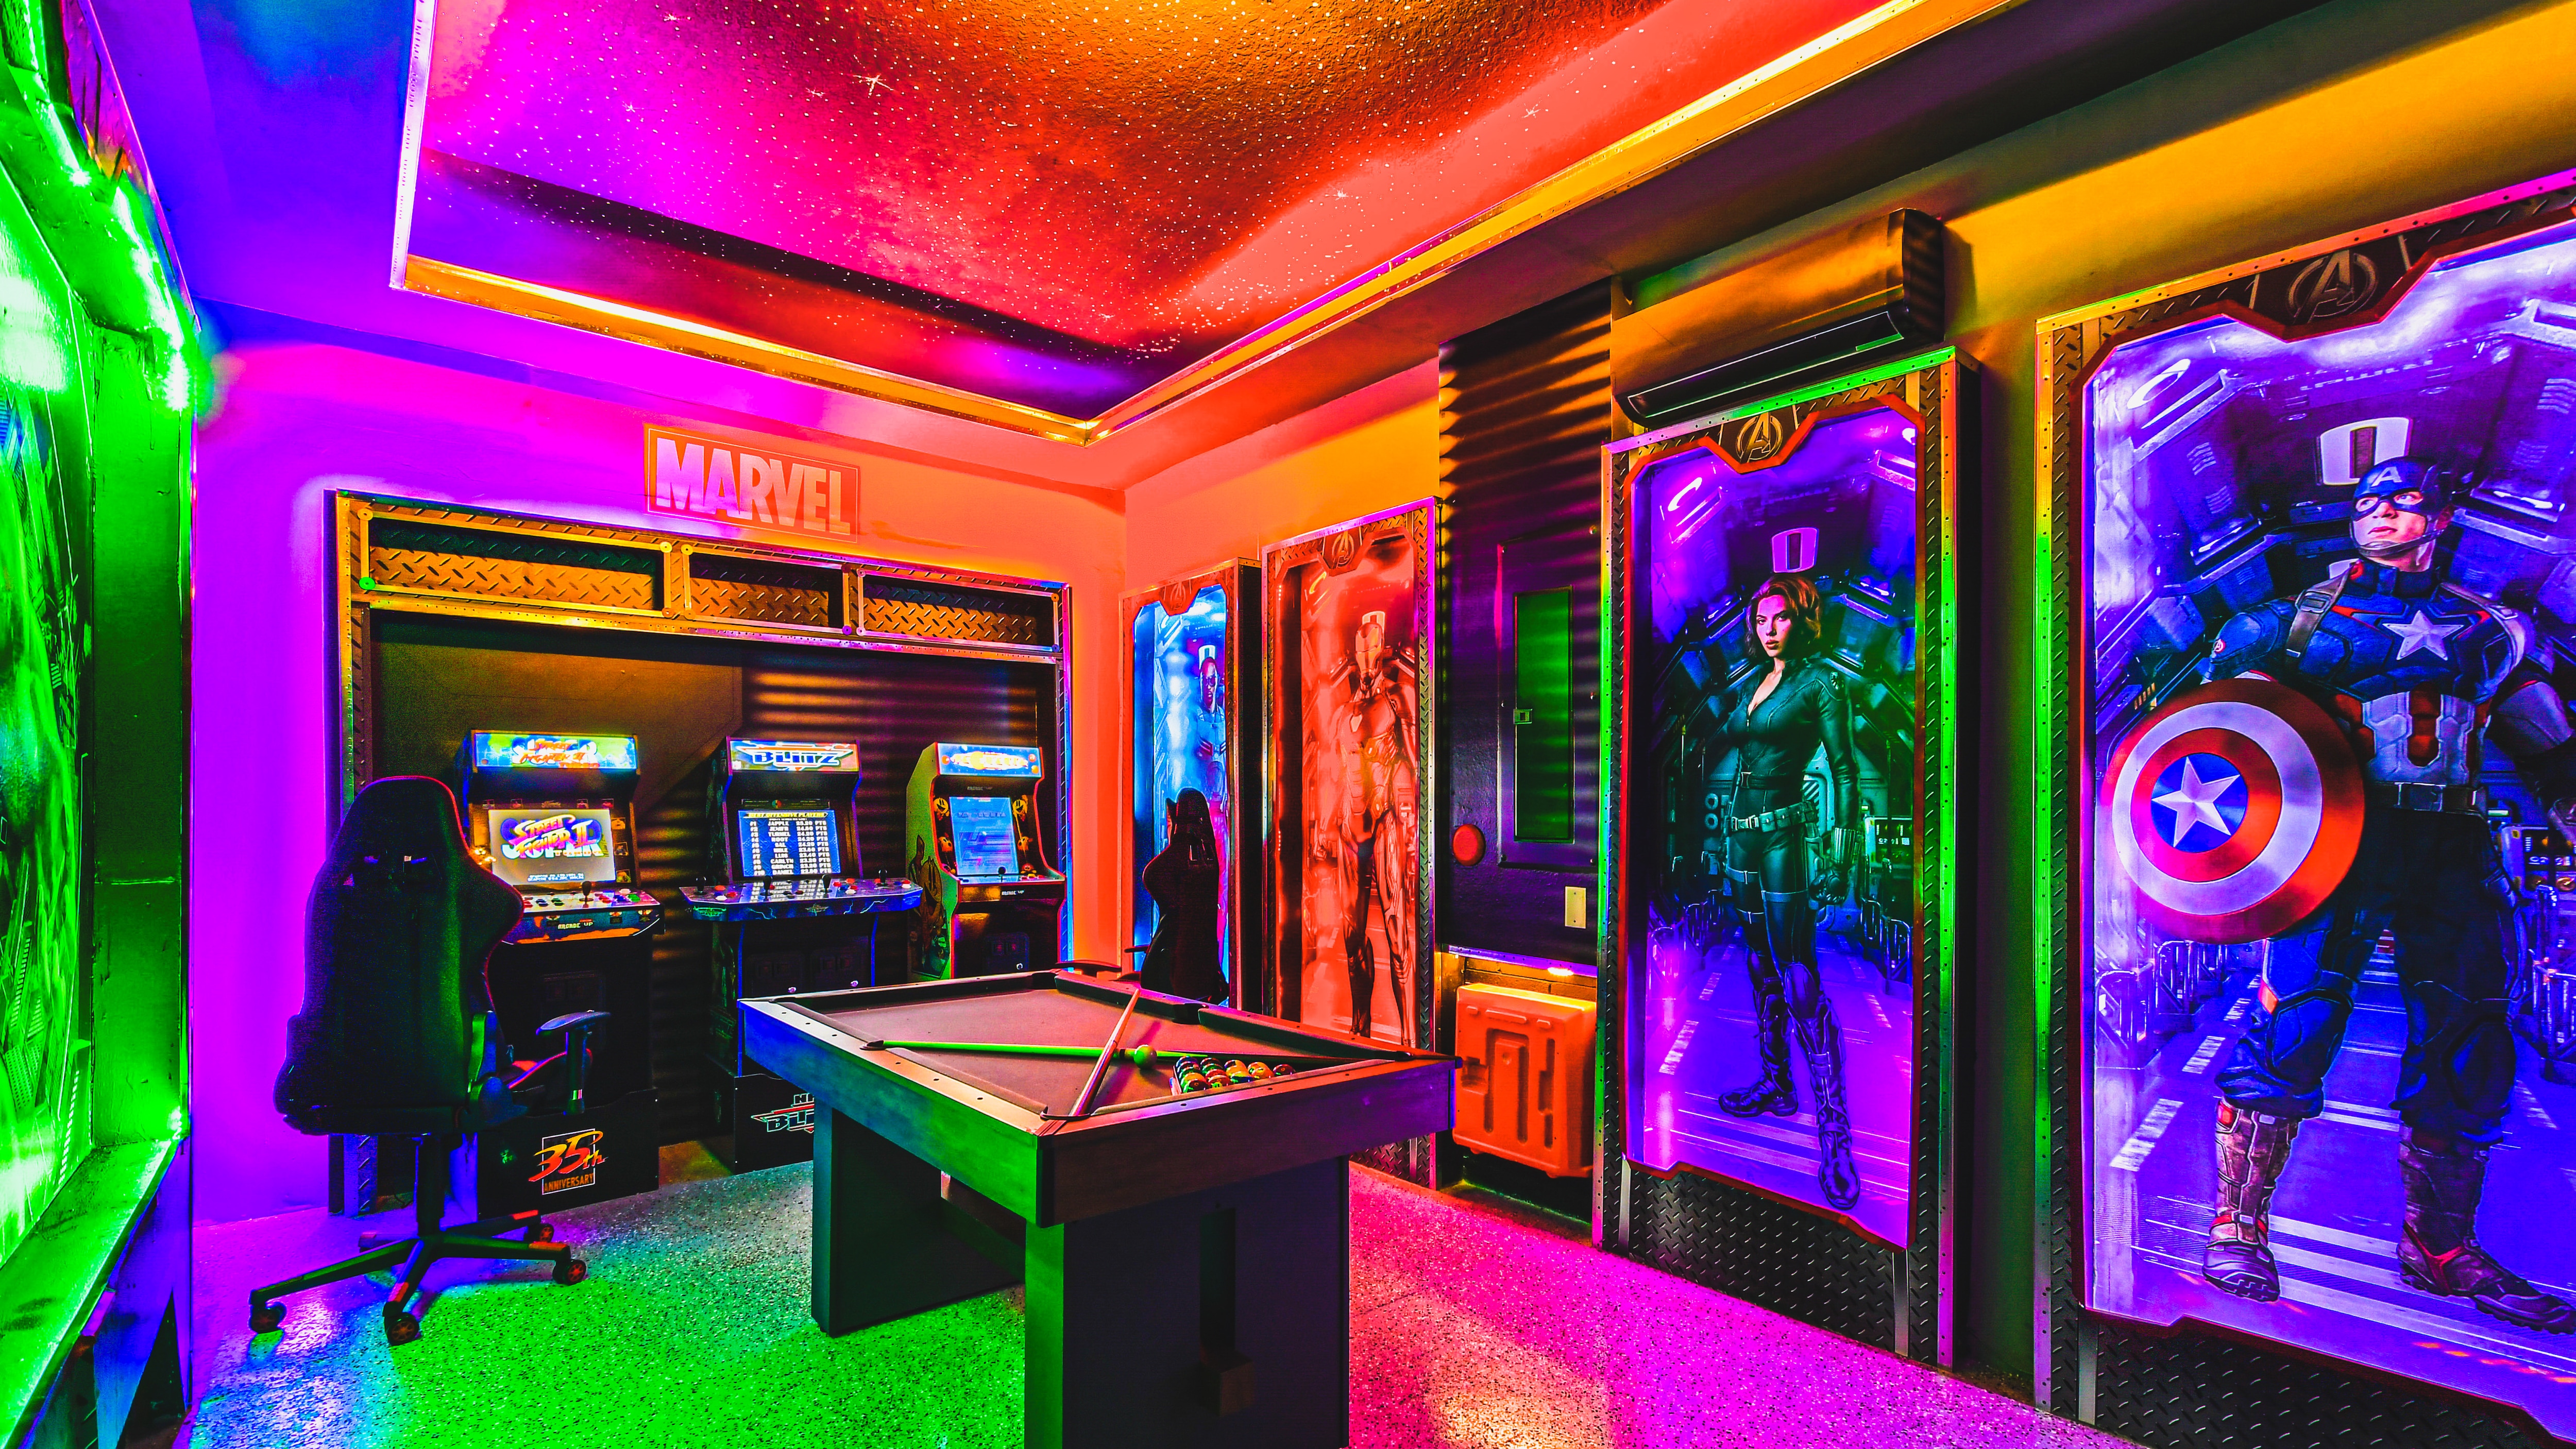 Arcade haven in Marvel decor, featuring games and pool table for epic gaming nights